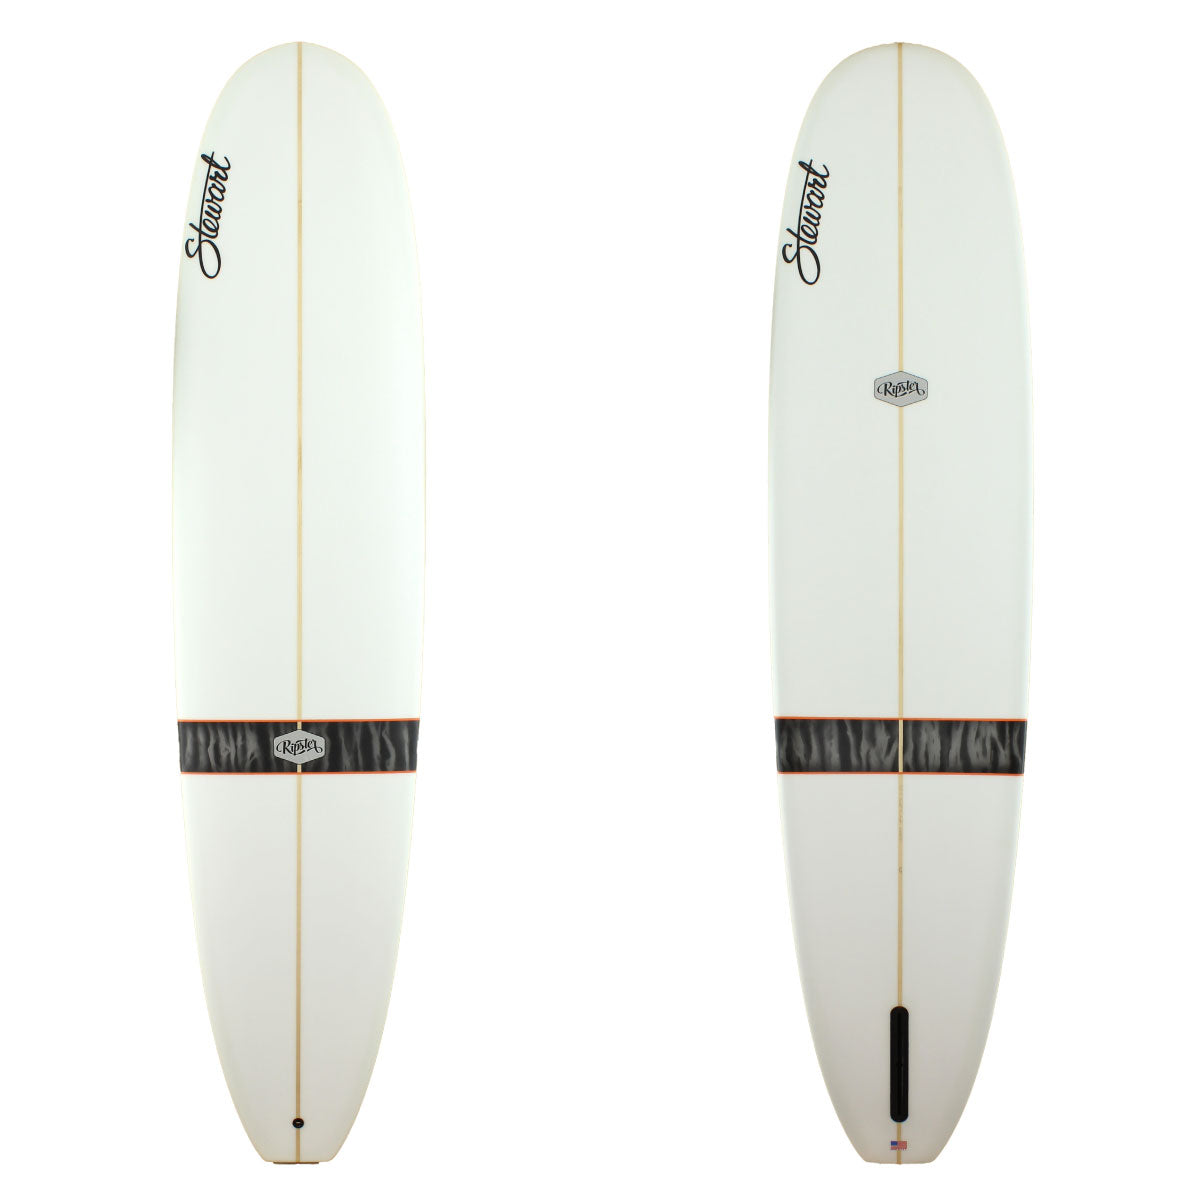 Stewart Surfboards 9'4 Ripster with black stripe and red pinline